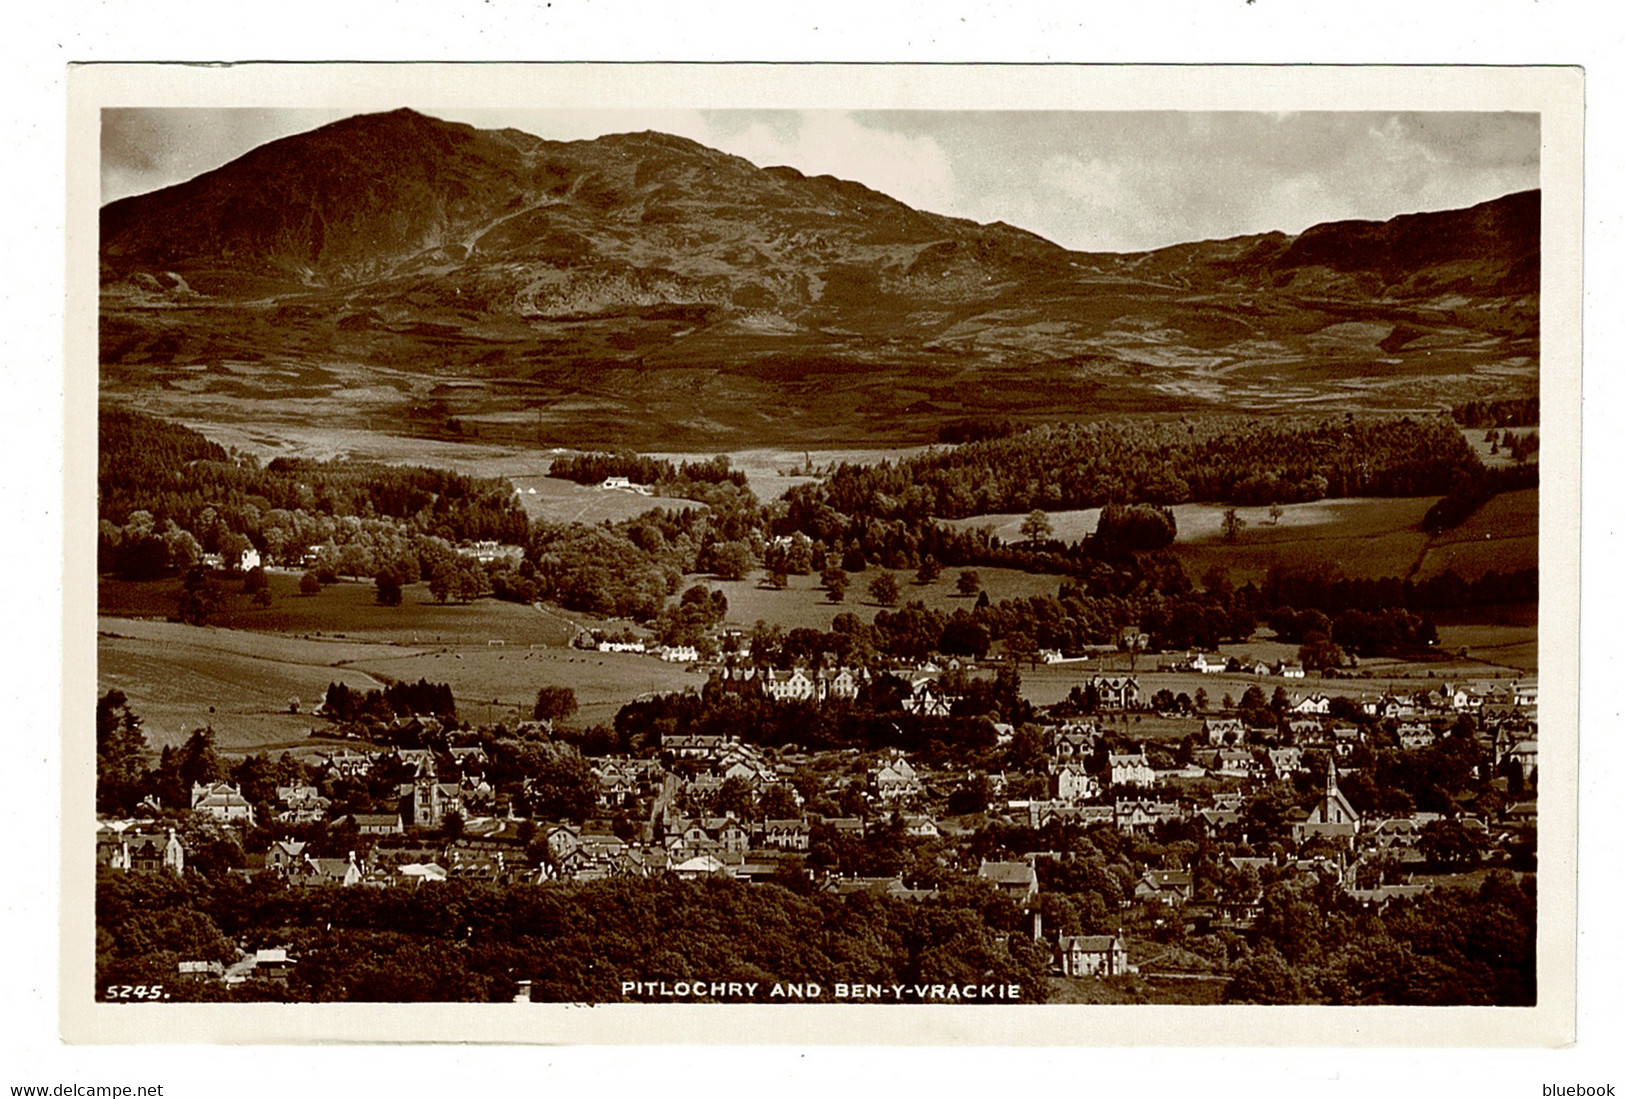 Ref 1413 - Real Photo Postcard - Pitlochry And Ben-Y-Vrackie - Perthshire Scotland - Perthshire